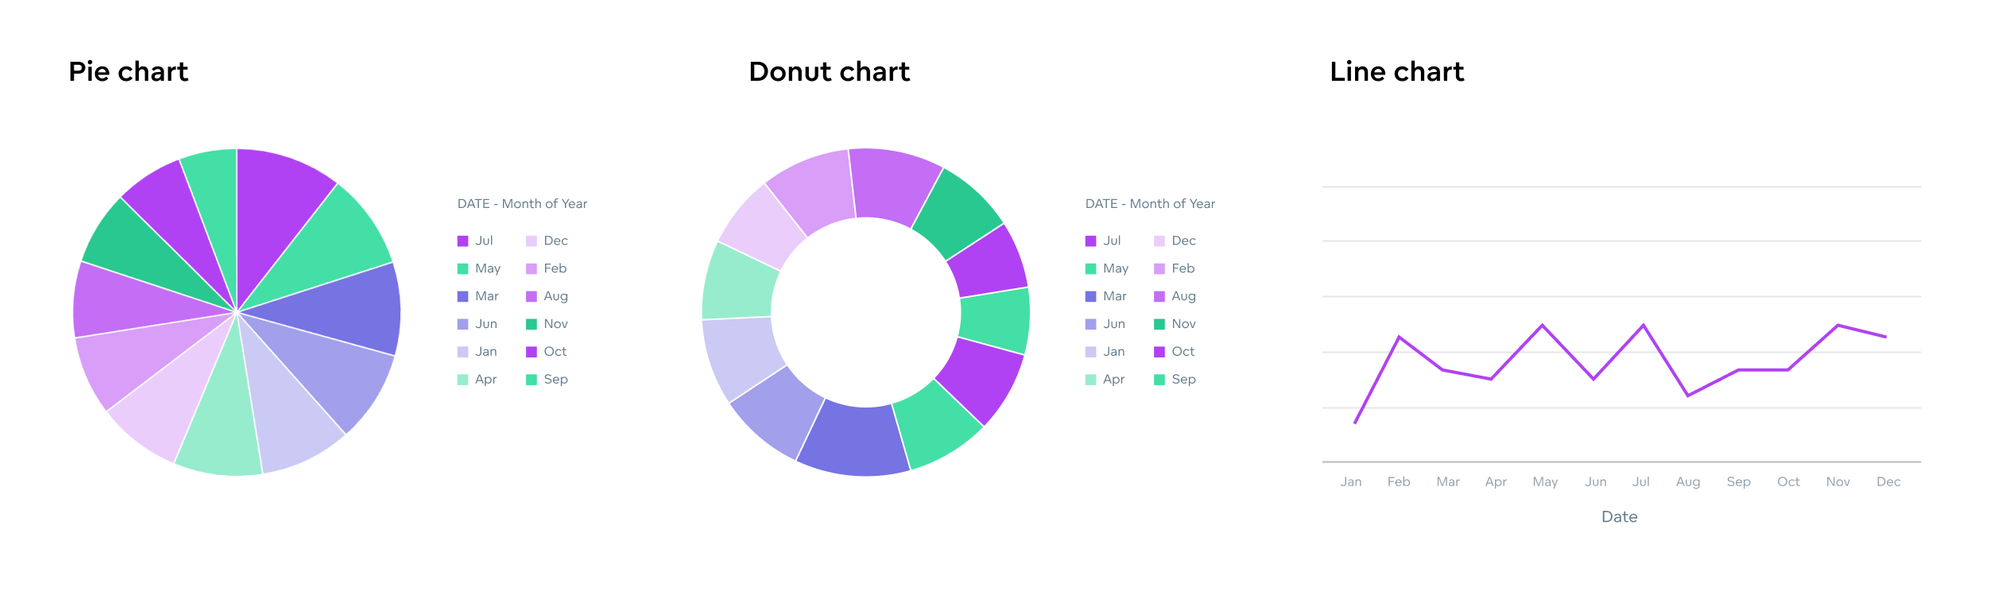 Sometimes a line chart can be a better option than a pie or donut chart.